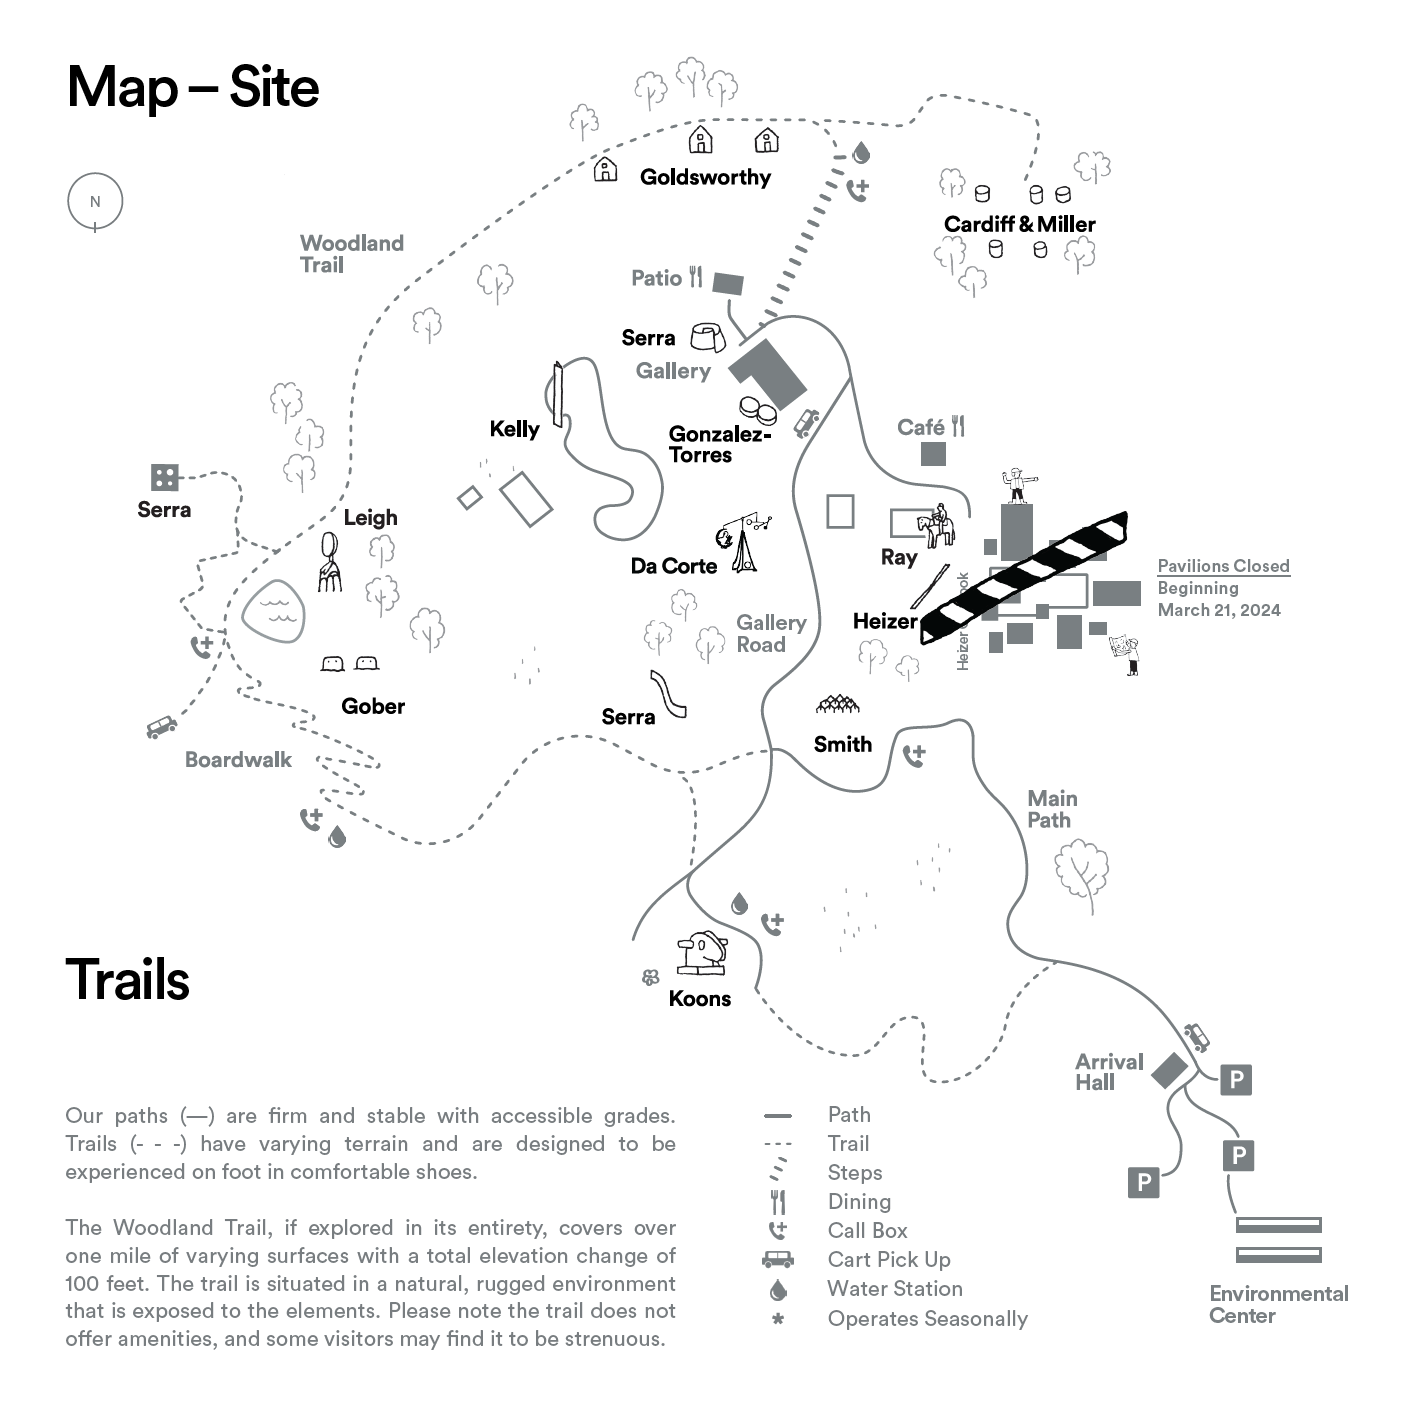 A map of Glenstone's grounds.